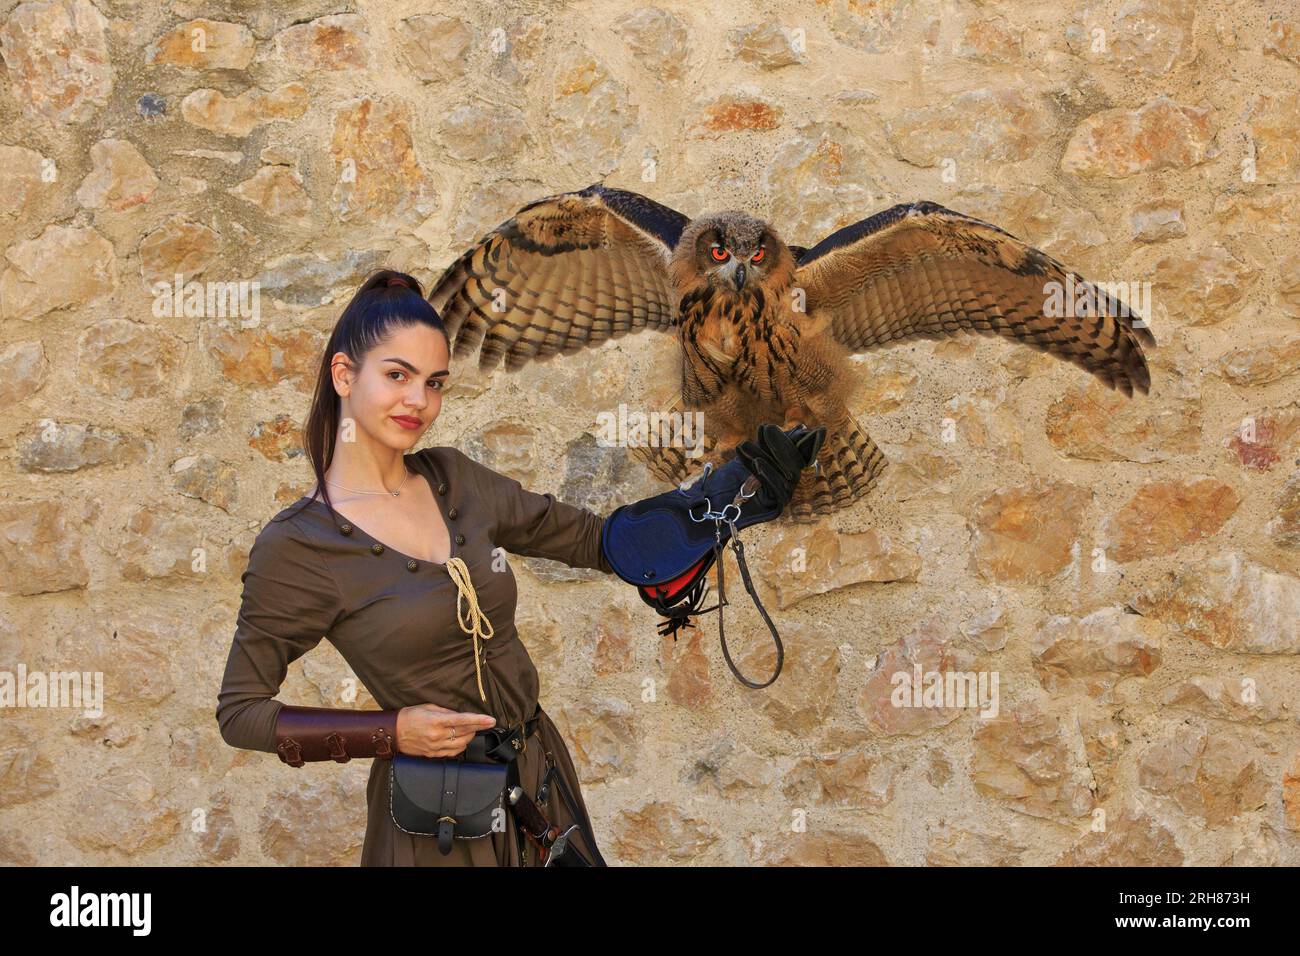 A female falconer holding a young Eurasian eagle-owl with big beautiful orange eyes at Golubac Fortress in Golubac, Serbia Stock Photo